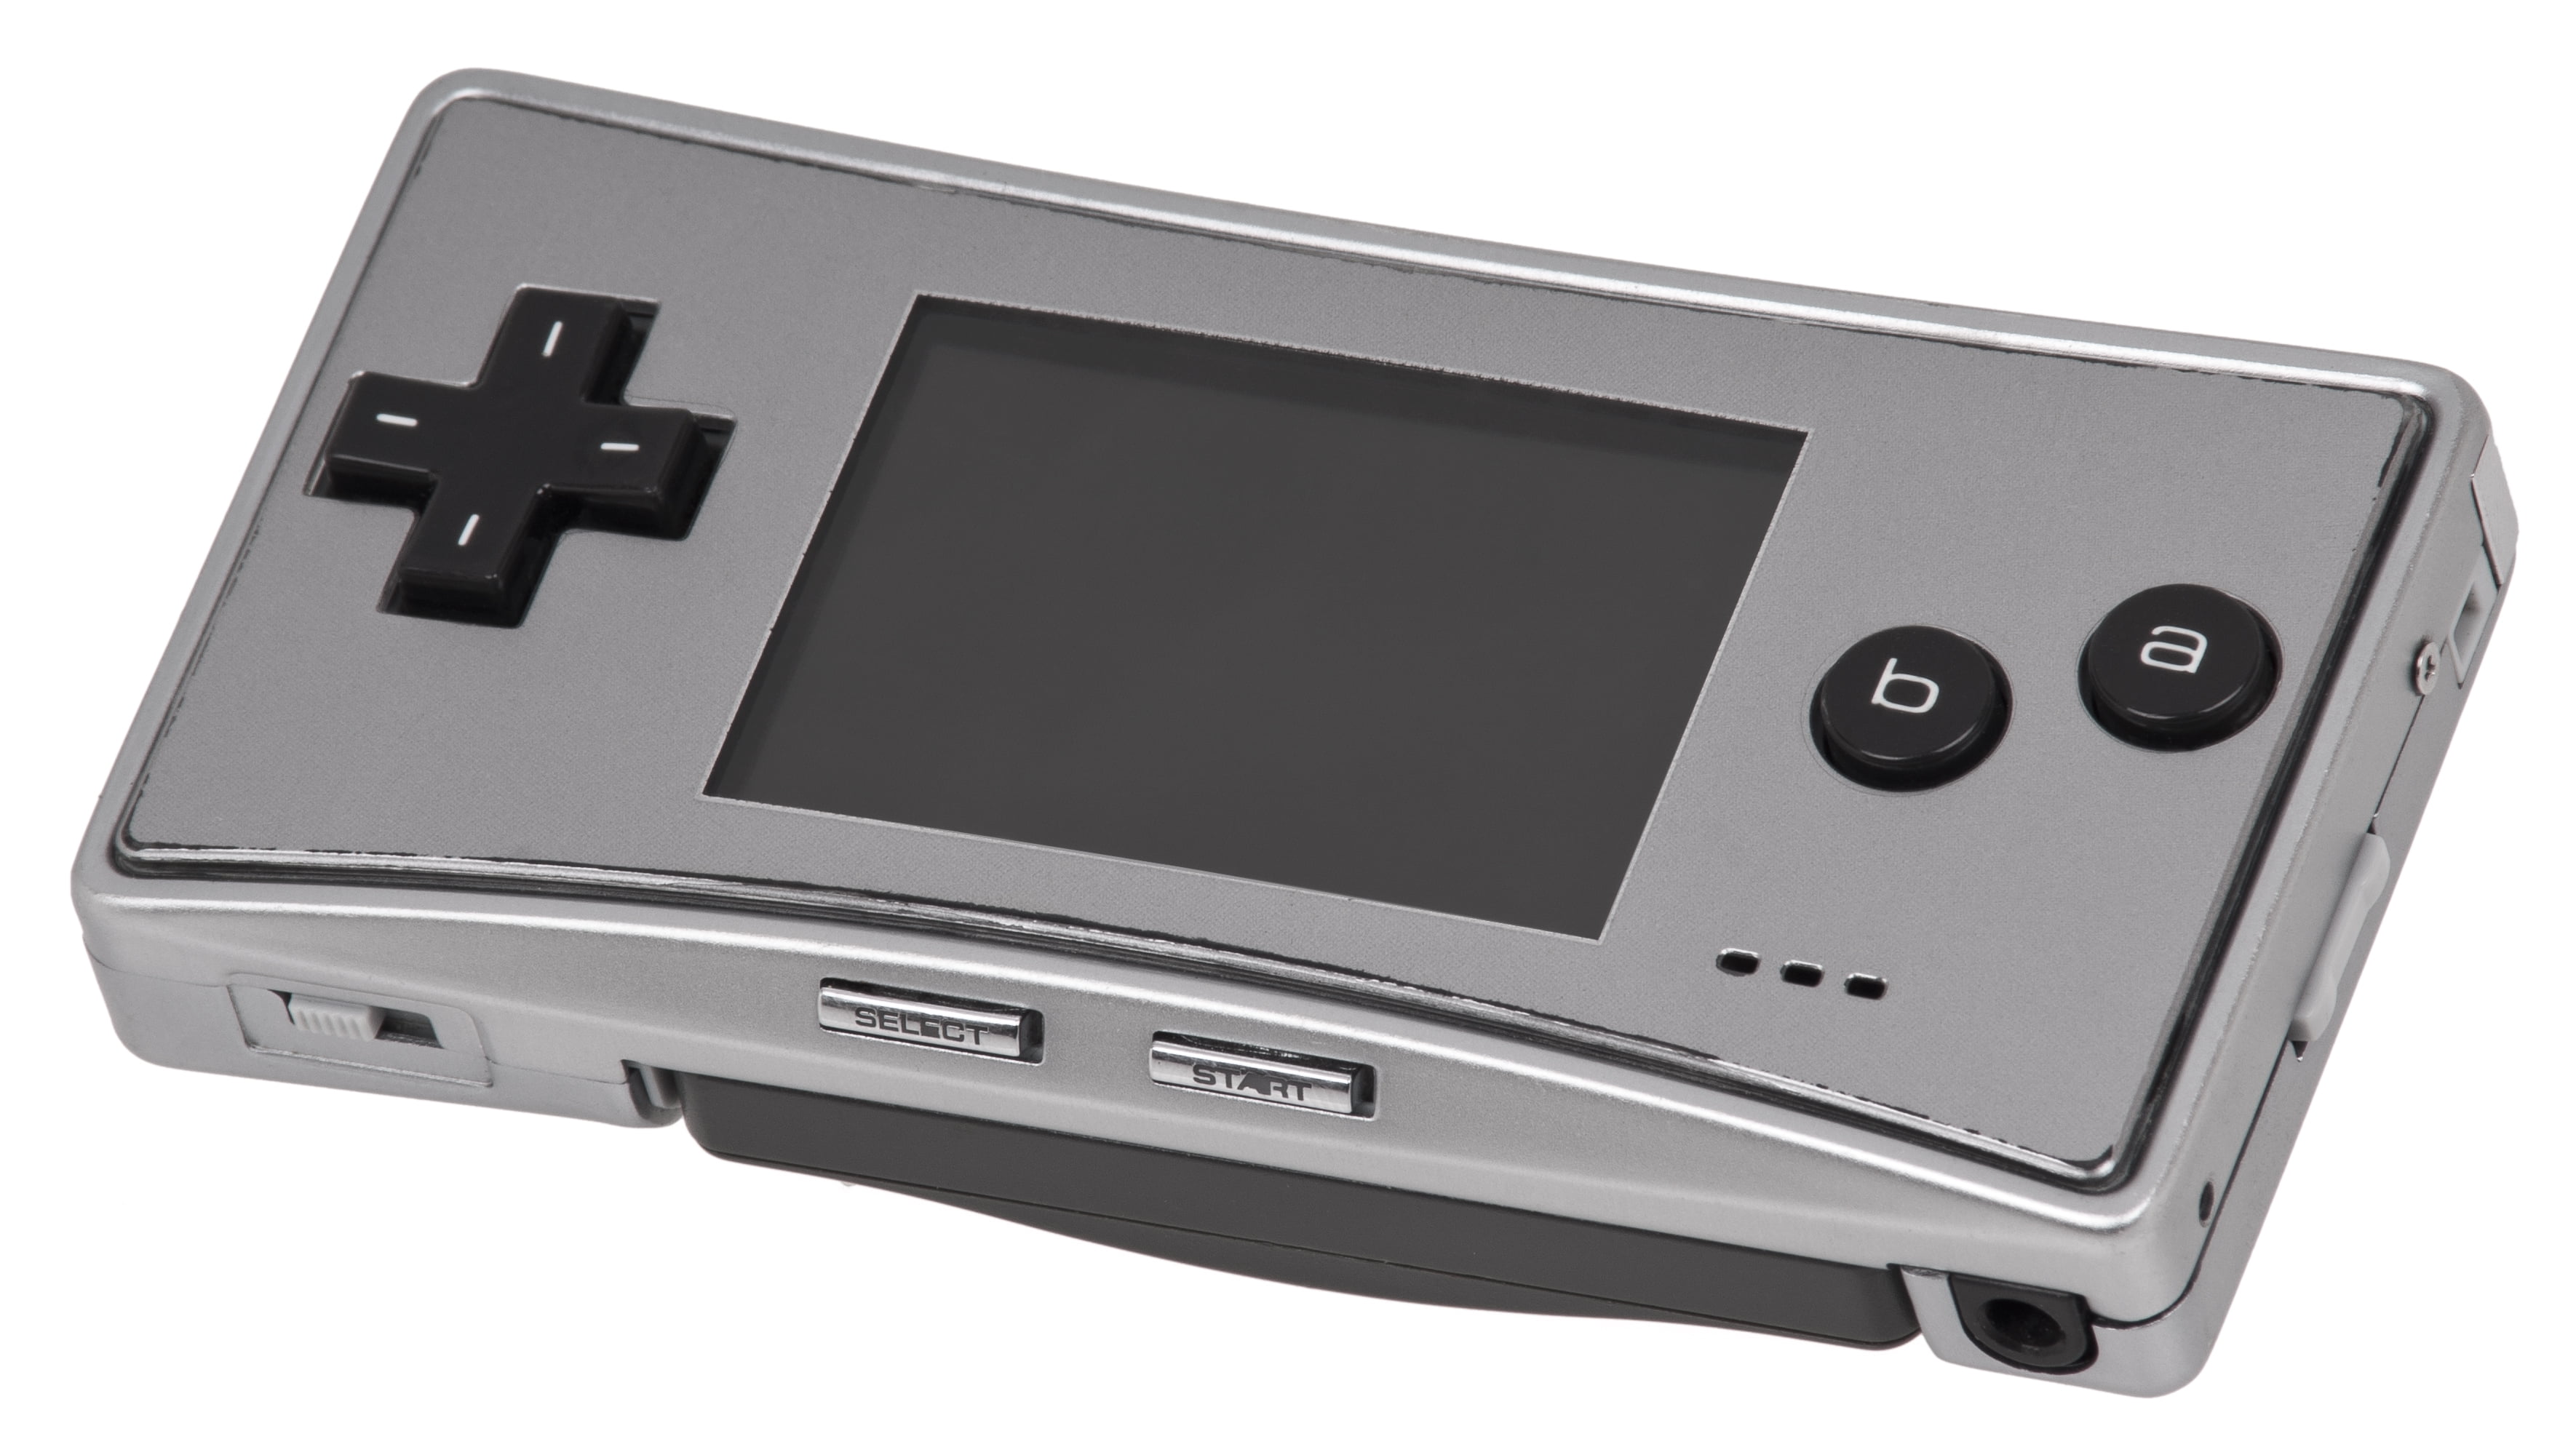 springvand indelukke Advarsel Restored Nintendo Game Boy Advance Micro - Silver - with Faceplate and  Charger (Refurbished) - Walmart.com